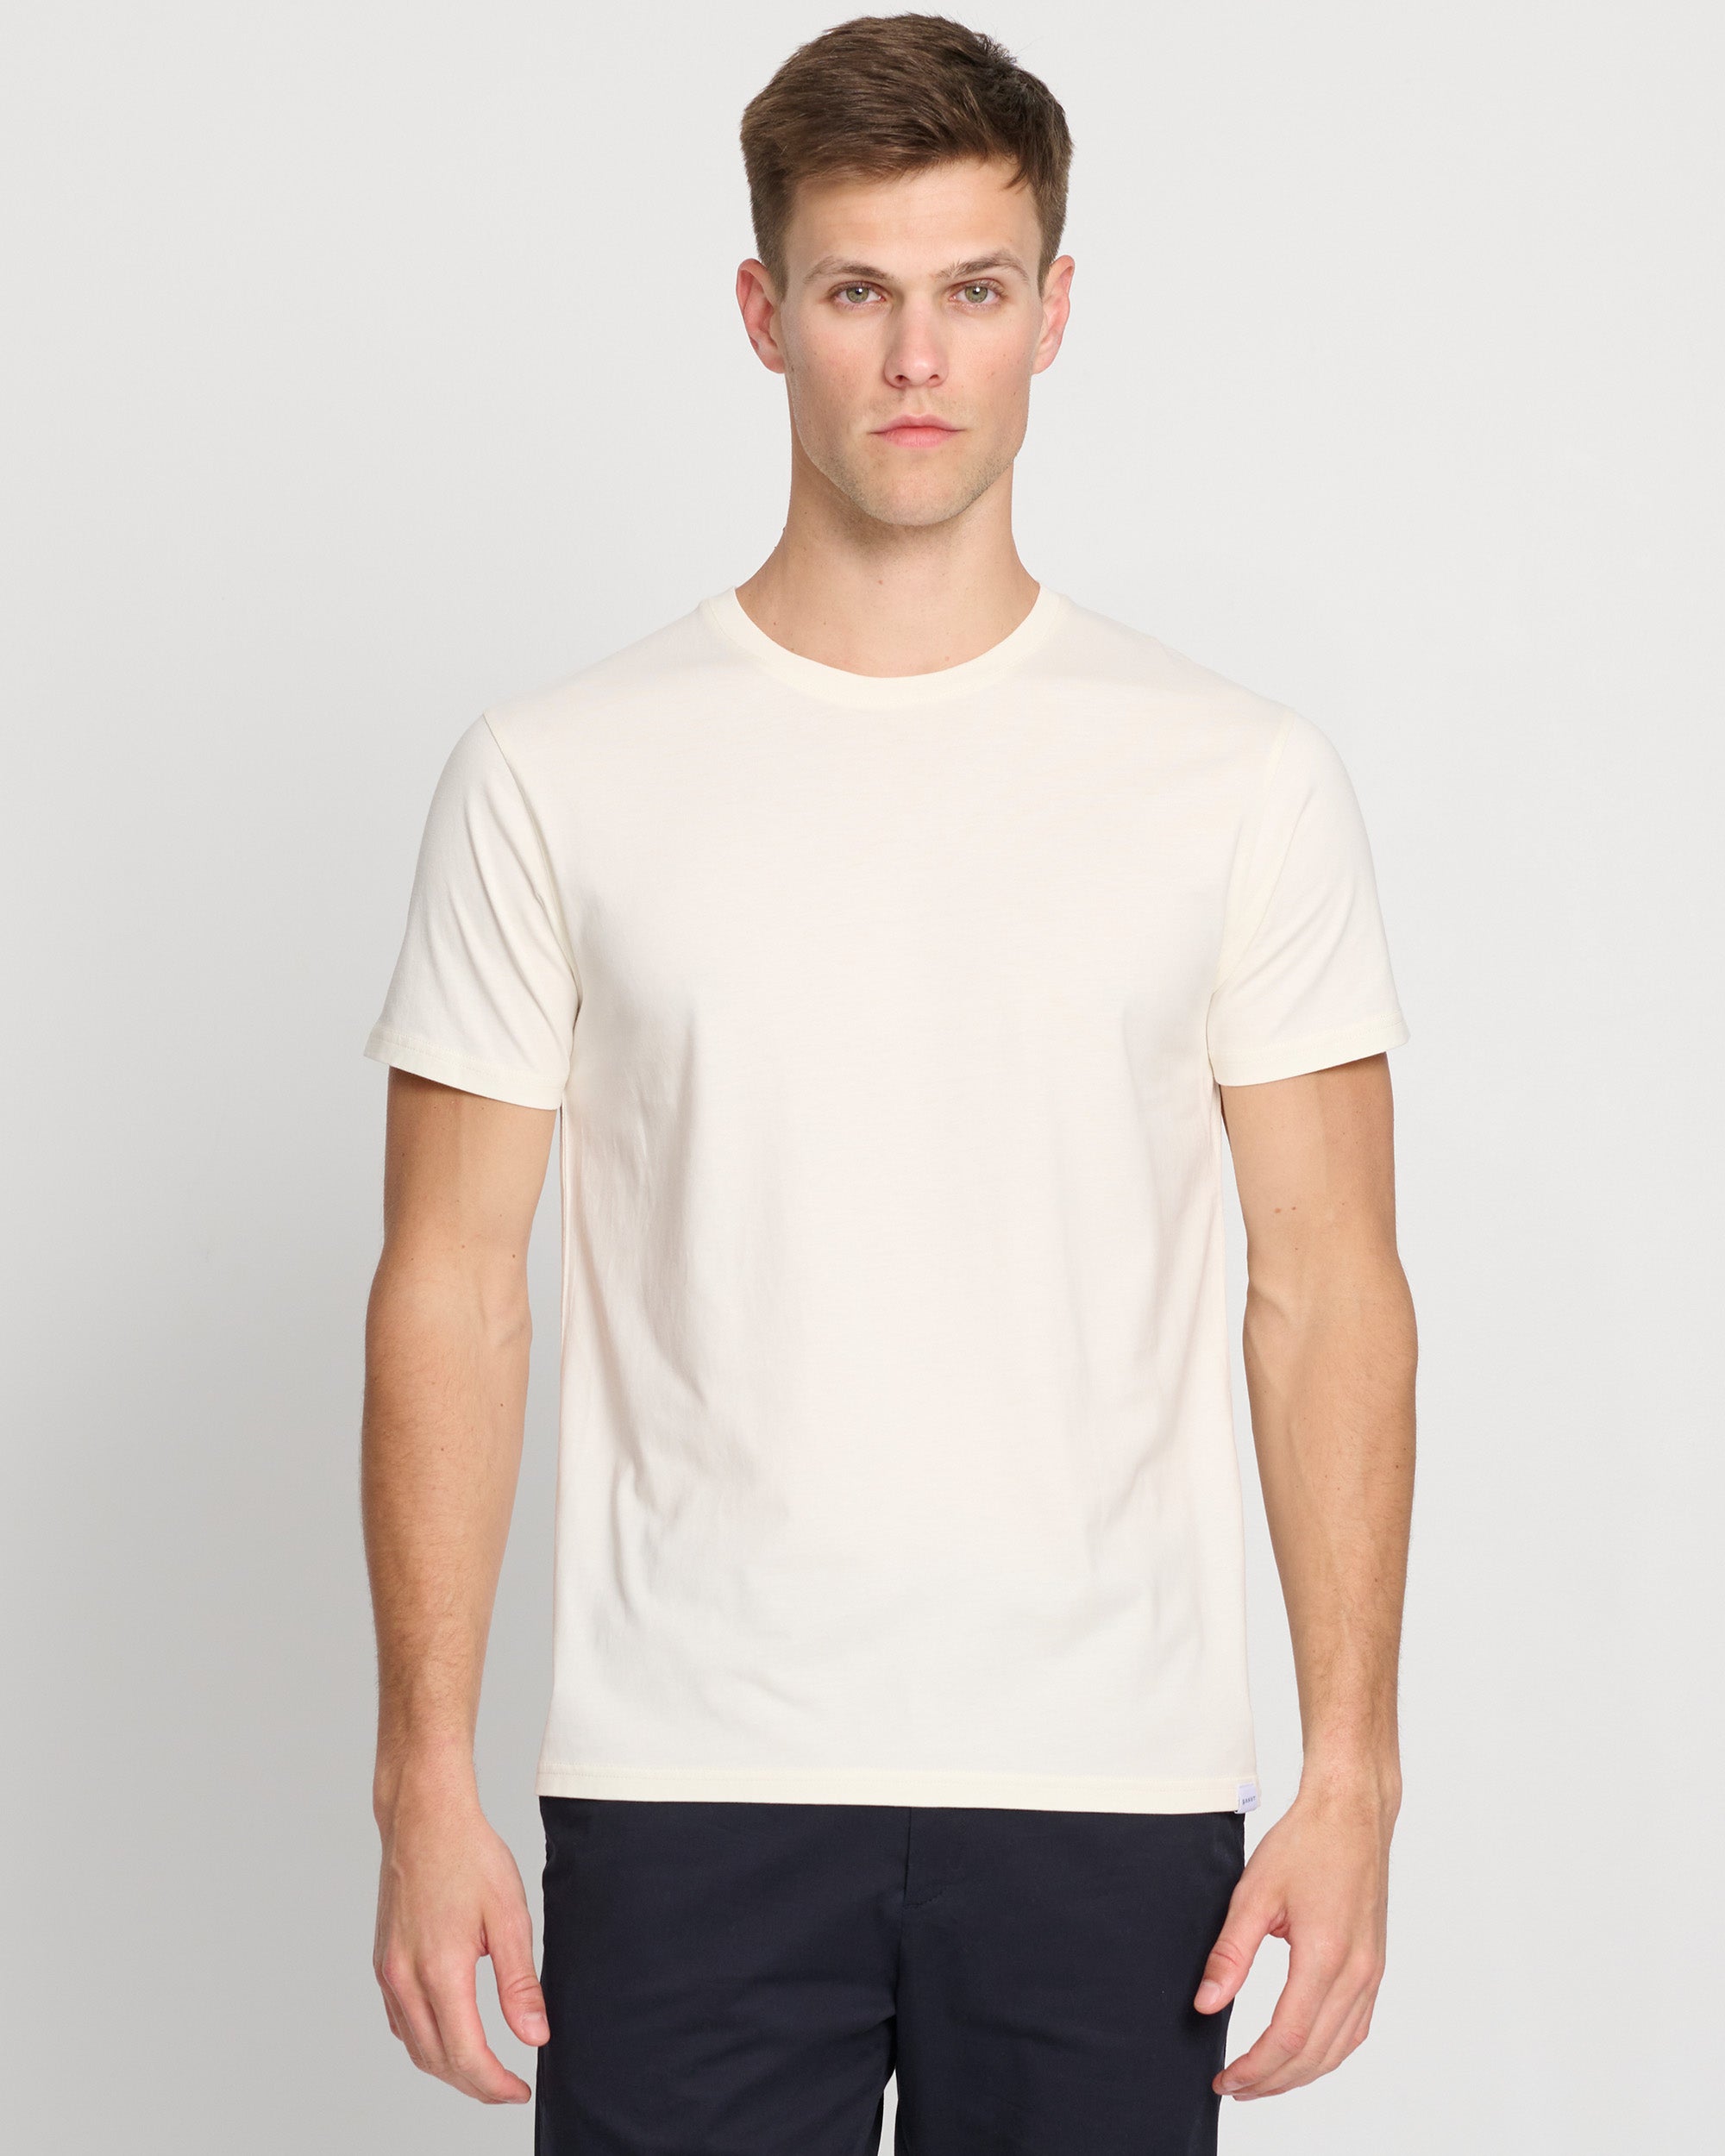 The Perfect Off-White T-Shirt | 185GSM Cotton for Men Premium